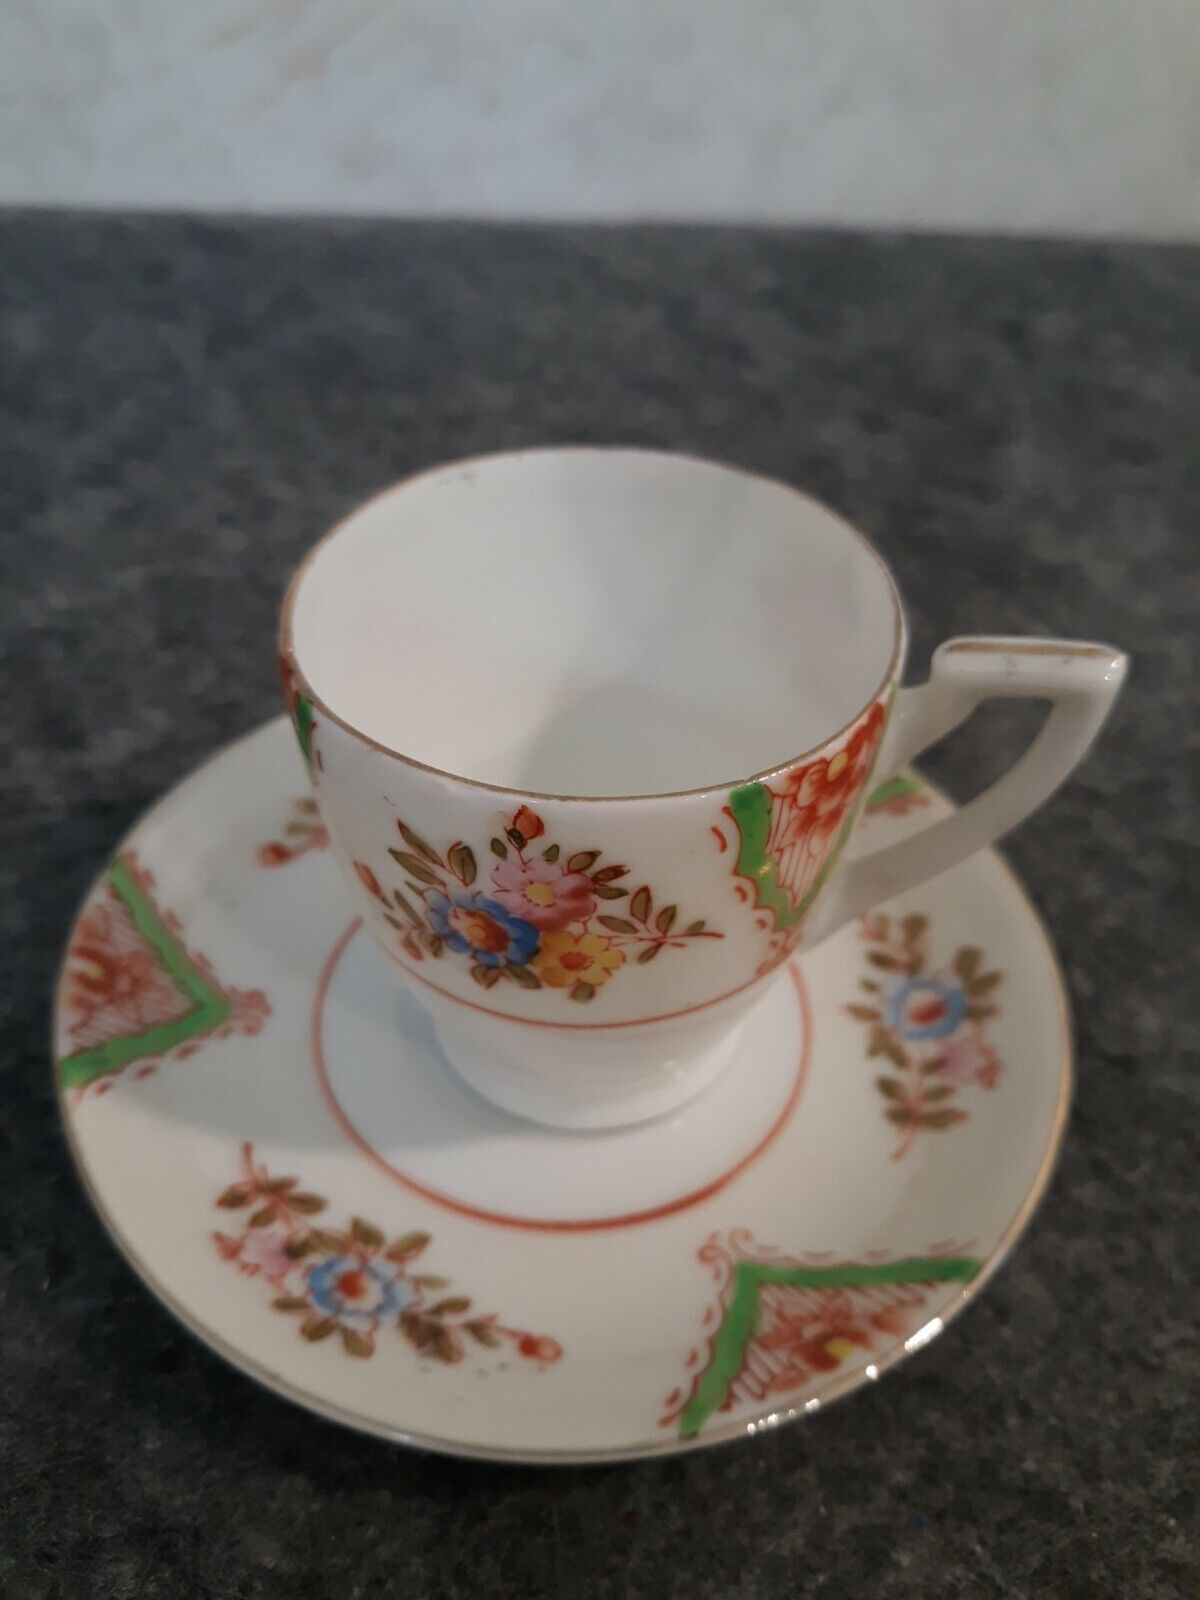  Sm. Vintage Chikaramachi hand painted tea cup and saucer made in Japan 